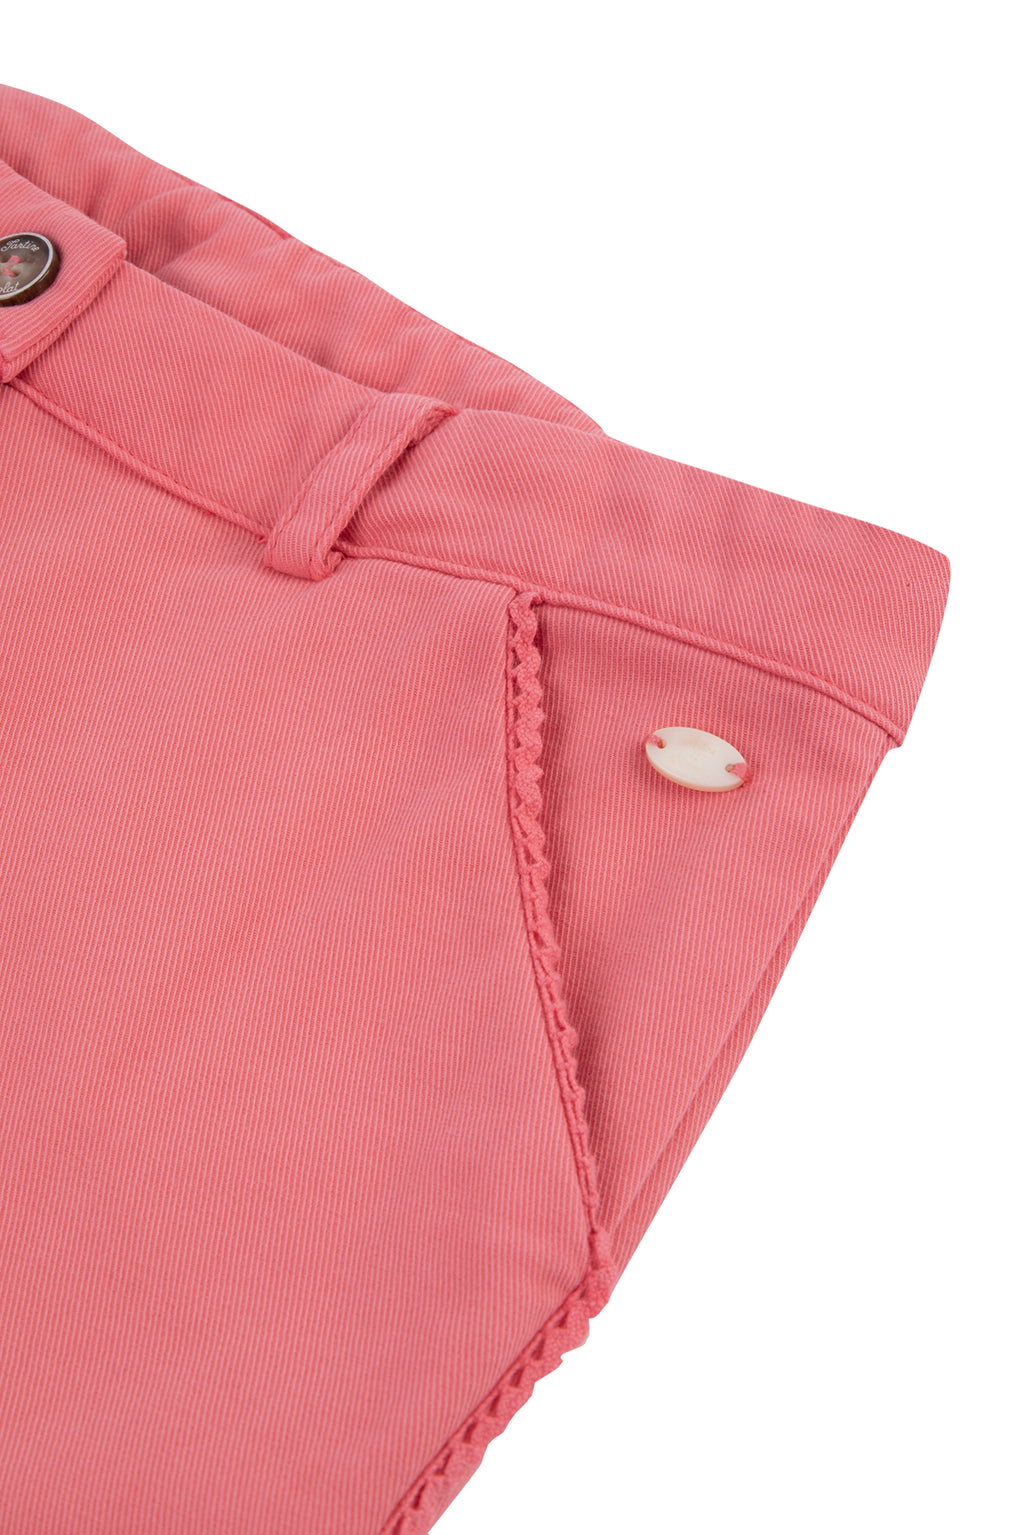 Jeans - Pink finishing Scallopede